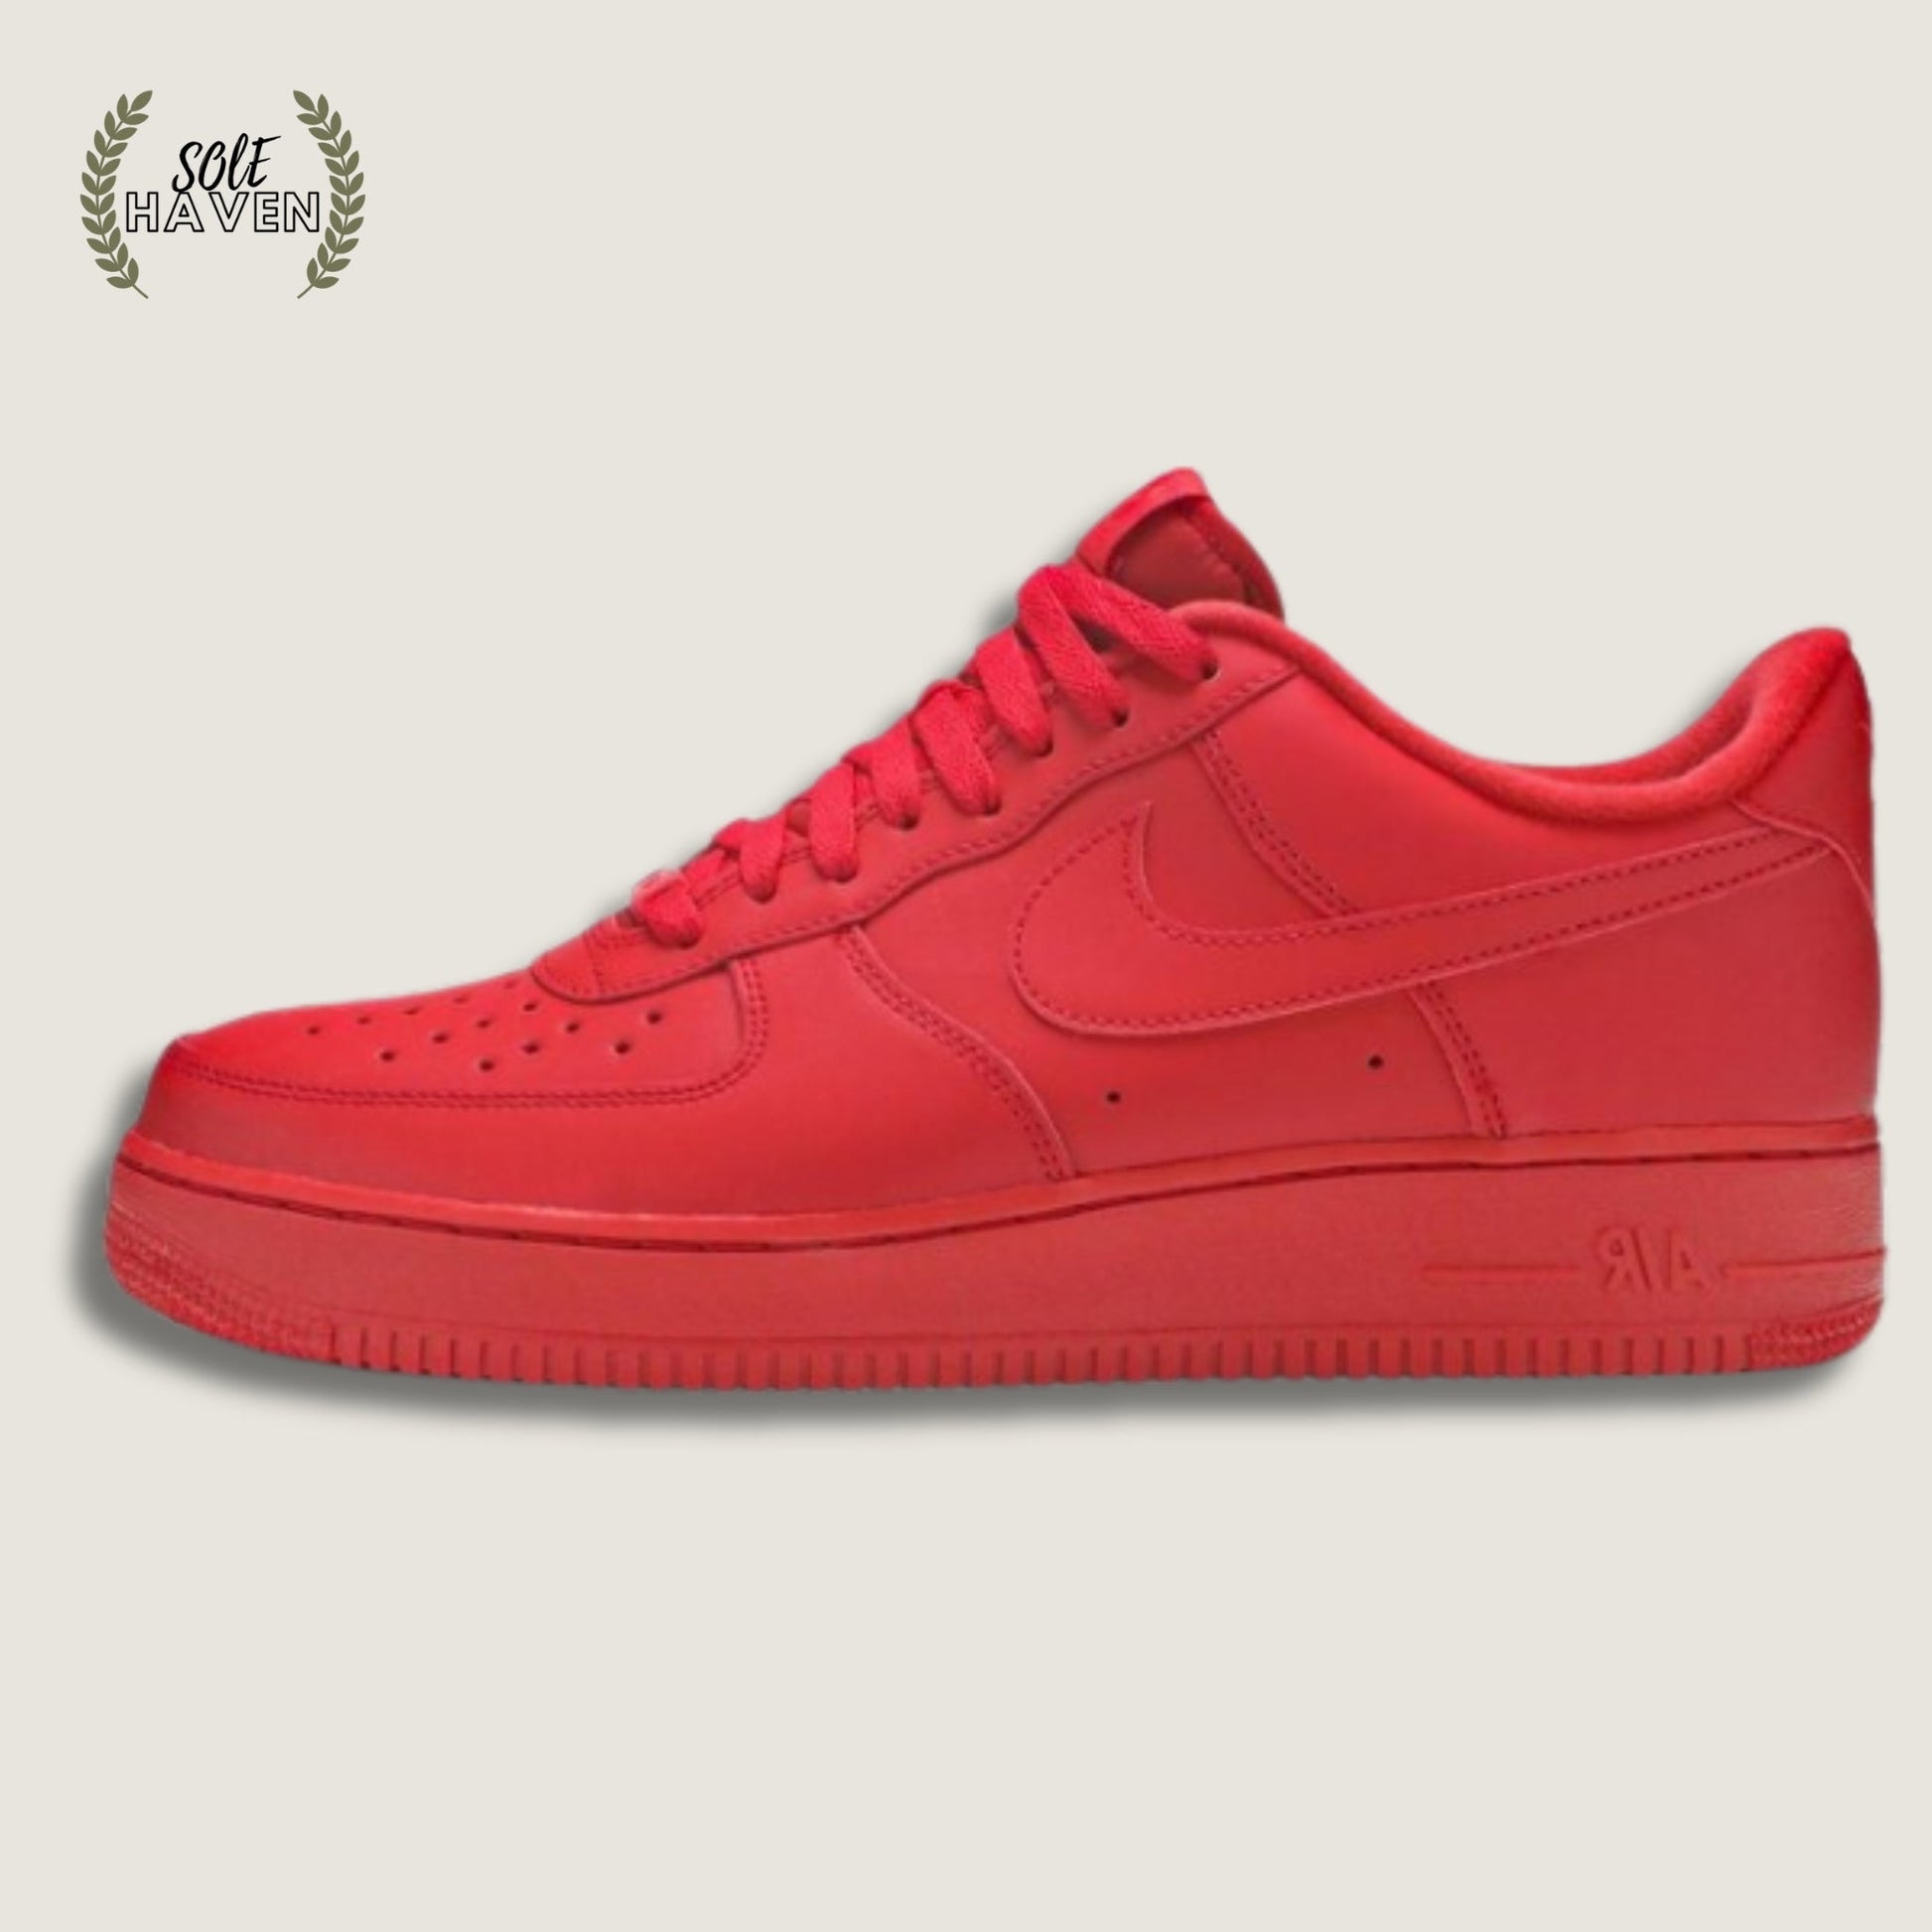 Air Force 1 Low '07 LV8 1 'Triple Red' - Sole HavenShoesNike